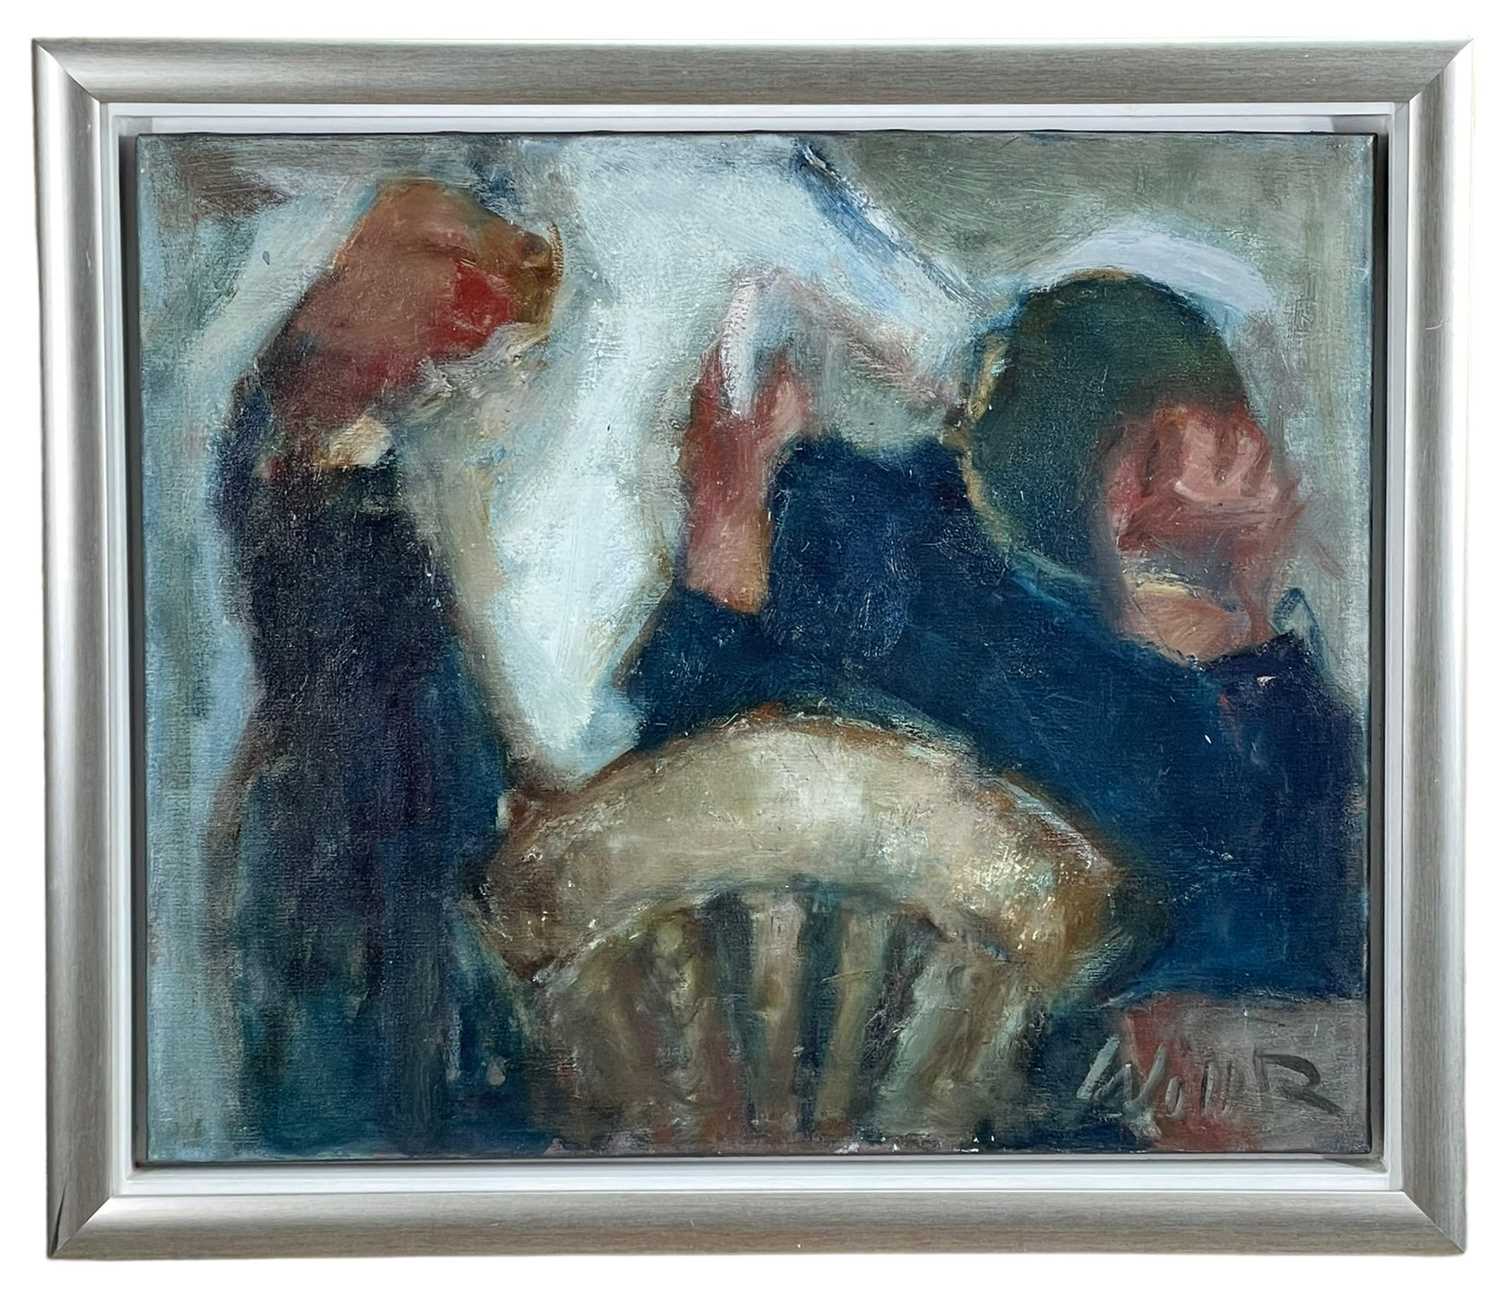 ‡ WILL ROBERTS oil on canvas - entitled verso, 'Readers' on Albany Gallery Label, signed and dated - Image 2 of 2